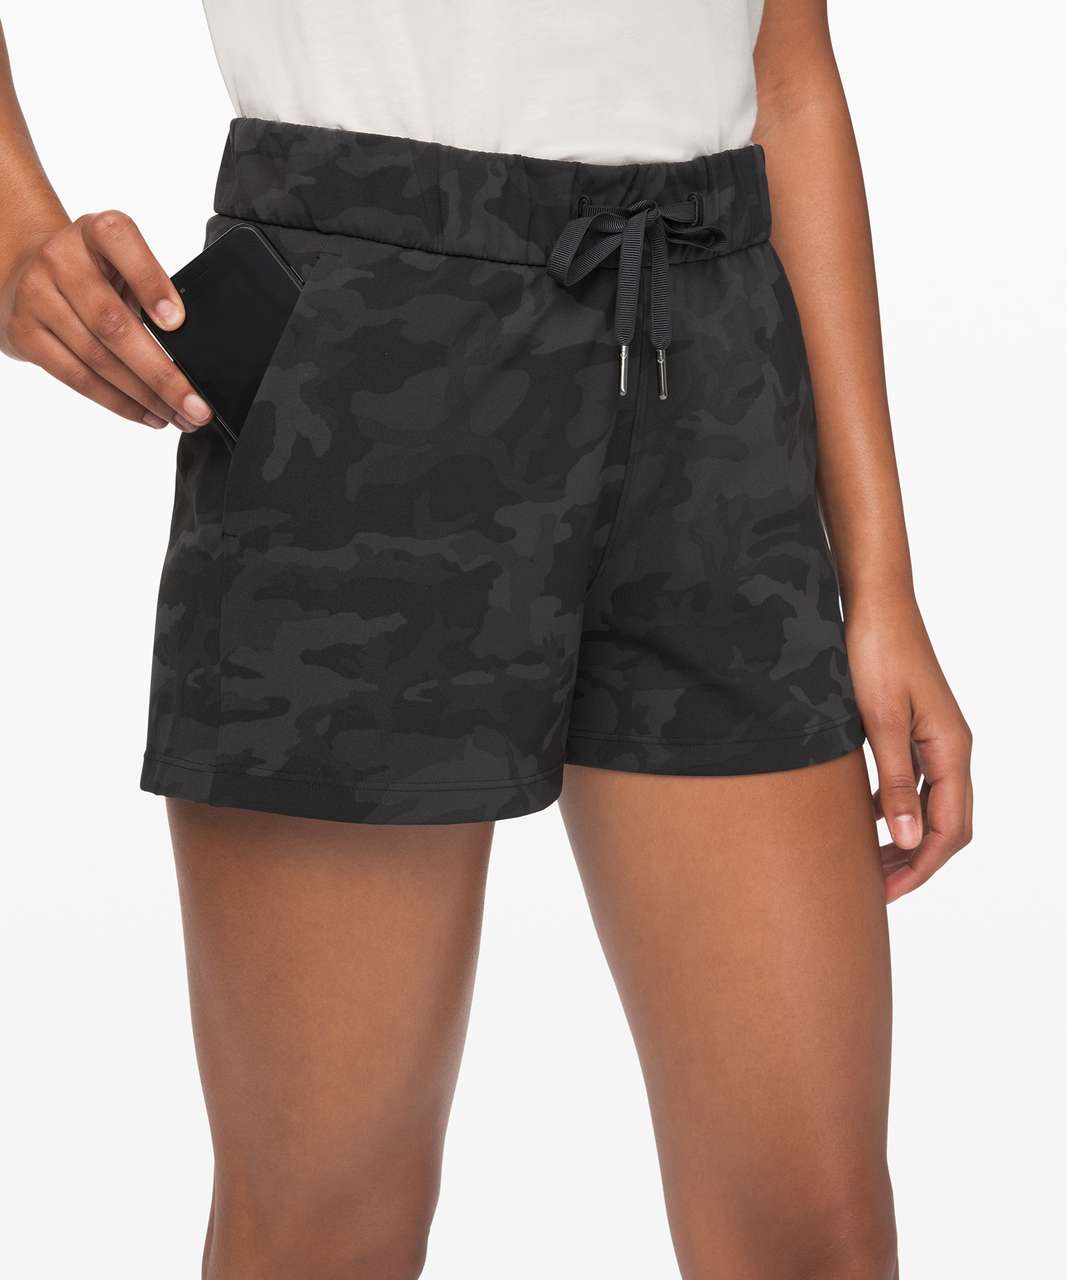 Lululemon On the Fly Short *2.5" - Incognito Camo Multi Grey